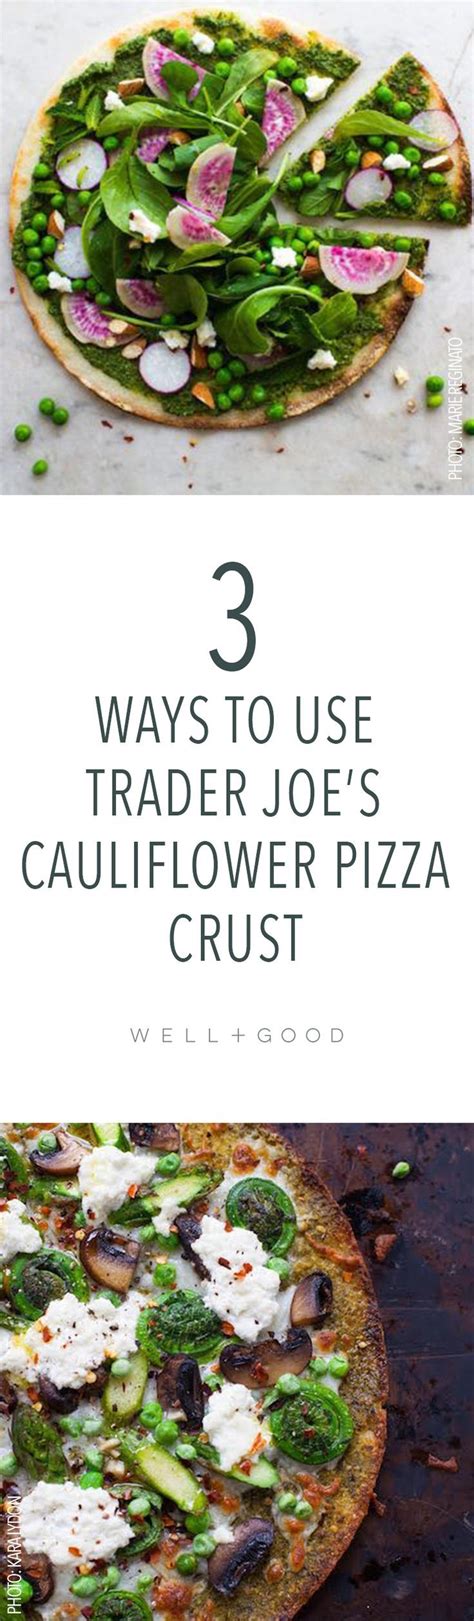 Head to the freezer section of trader joe's to find one of our latest obsessions: Trader Joe's cauliflower crust pizza recipes | Cauliflower pizza crust recipe, Cauliflower pizza ...